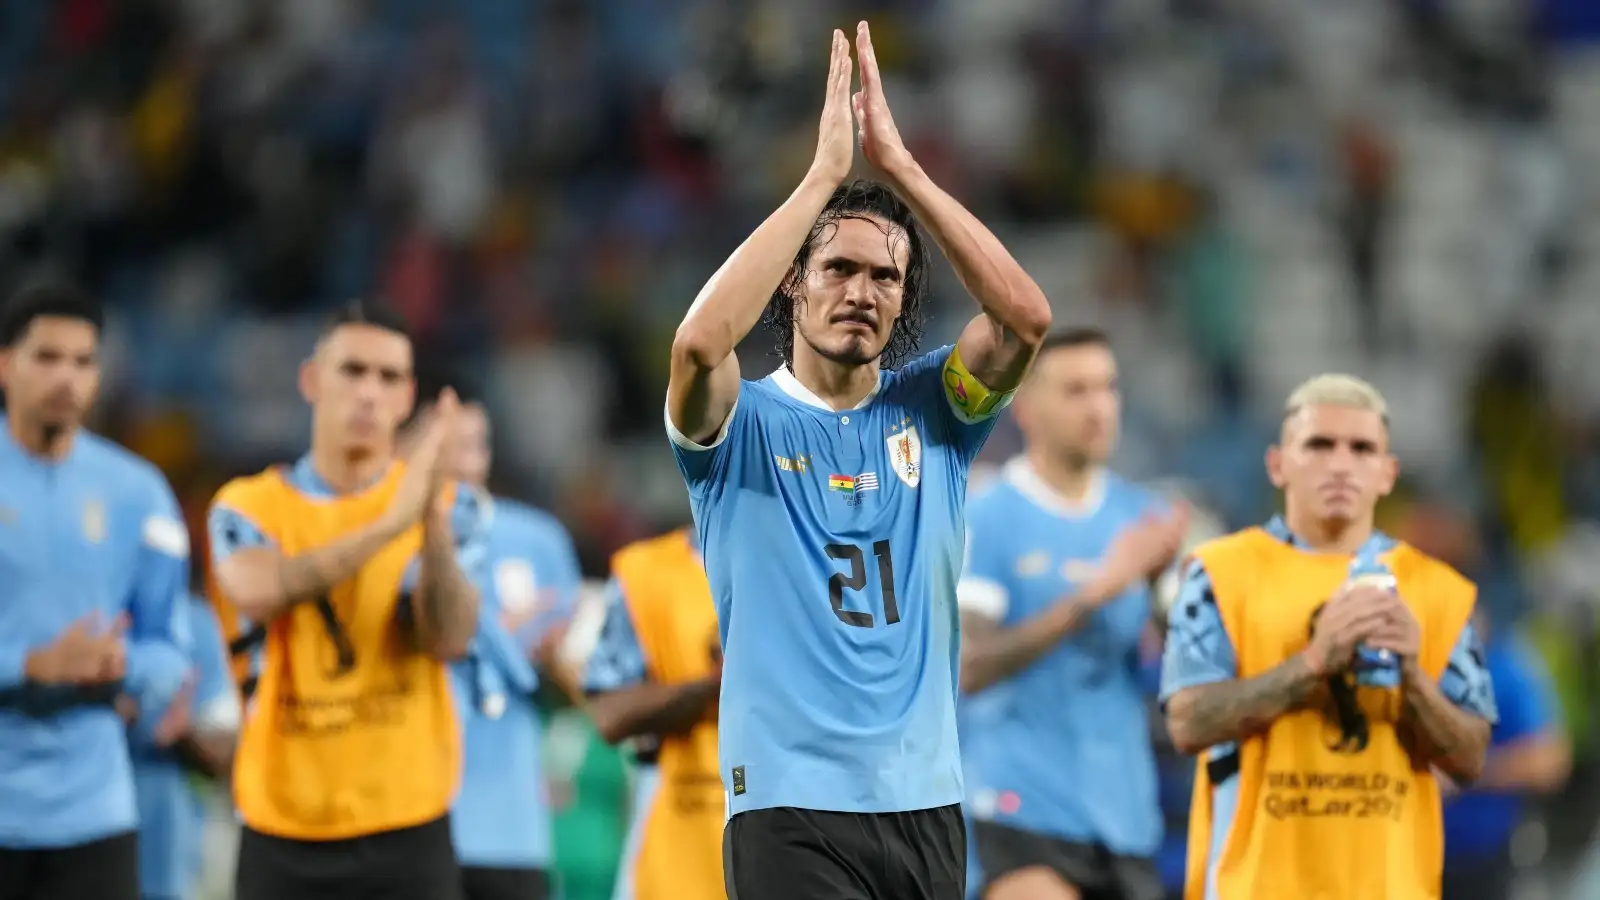 Watch: Pure carnage as Cavani, Suarez & Uruguay knocked out of WC